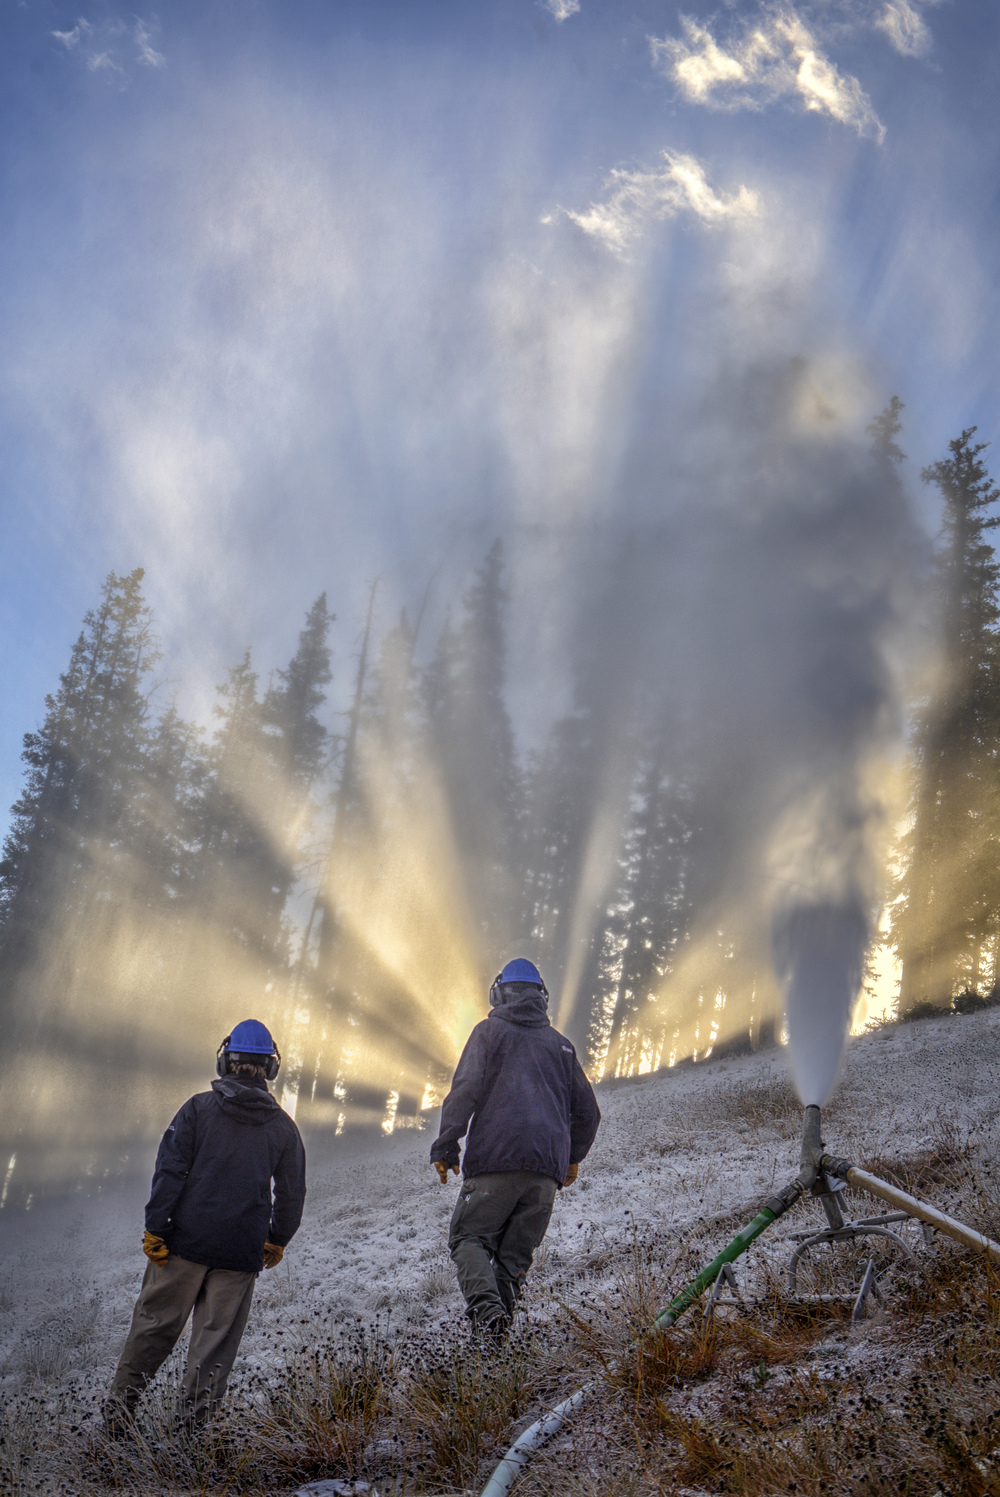 Snowmaking began at Copper Mountain, CO yesterday morning. photo: Tripp Fay/Copper Mountain Resort